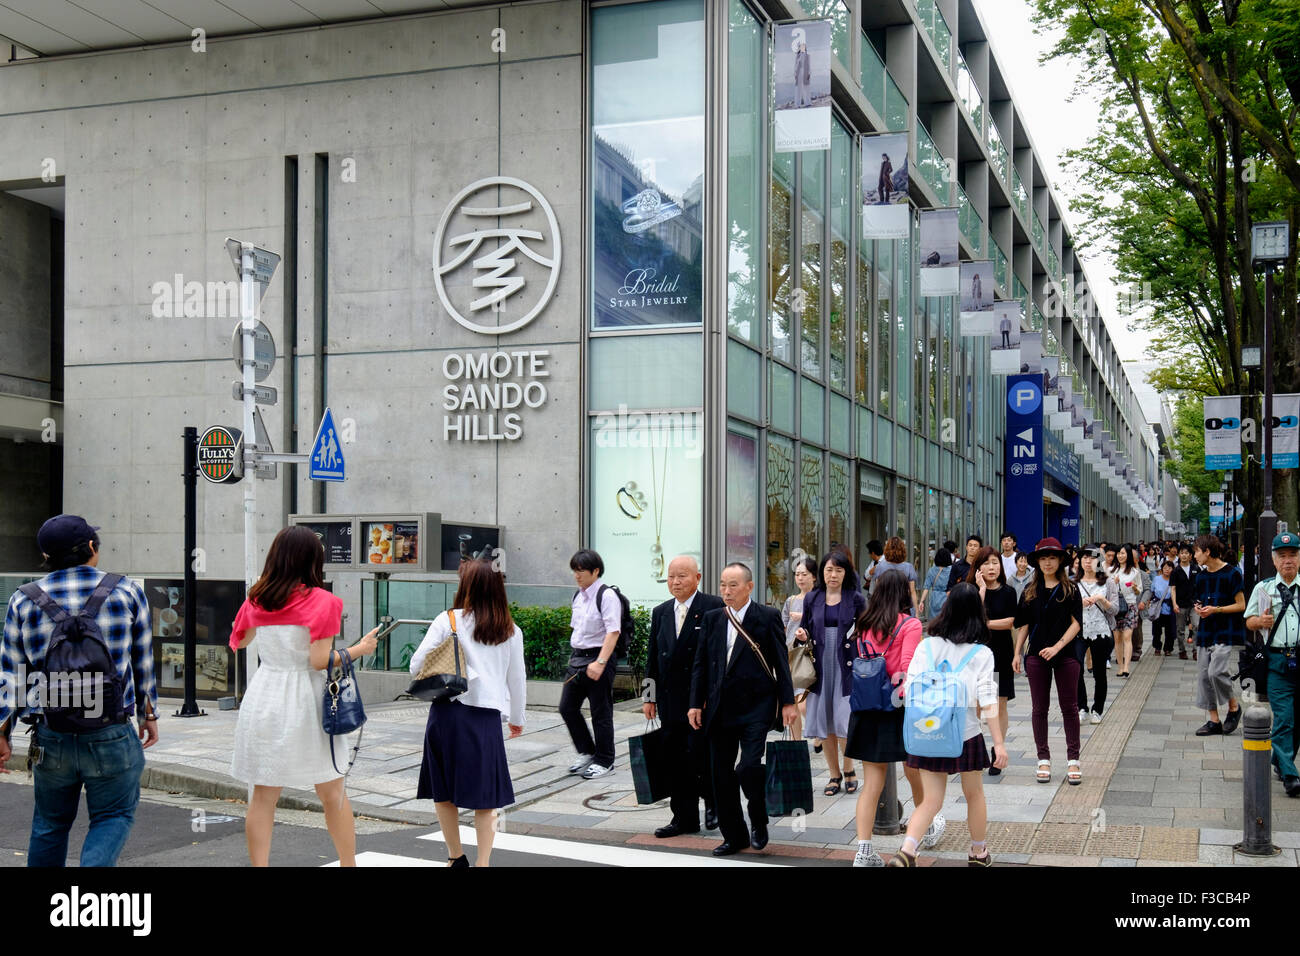 Busy shopping street and Omotesando hills shopping Mall in elegant Omotesando district of Tokyo Japan Stock Photo